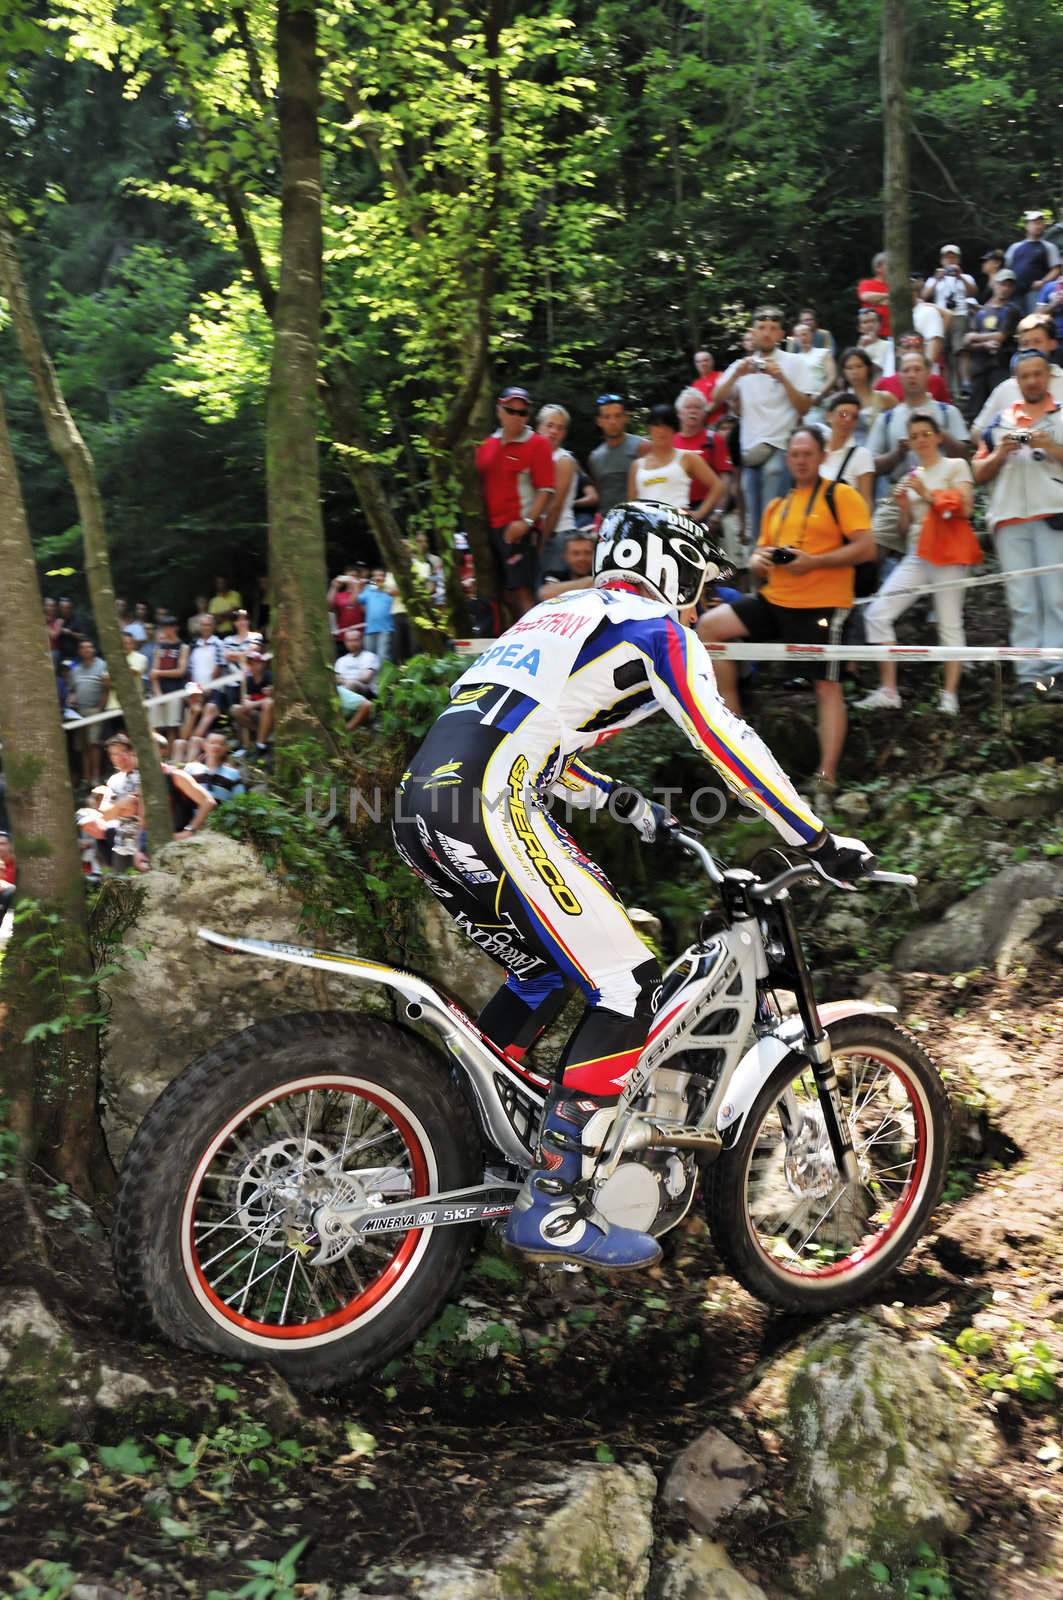 Rider in the wood and spectators in background